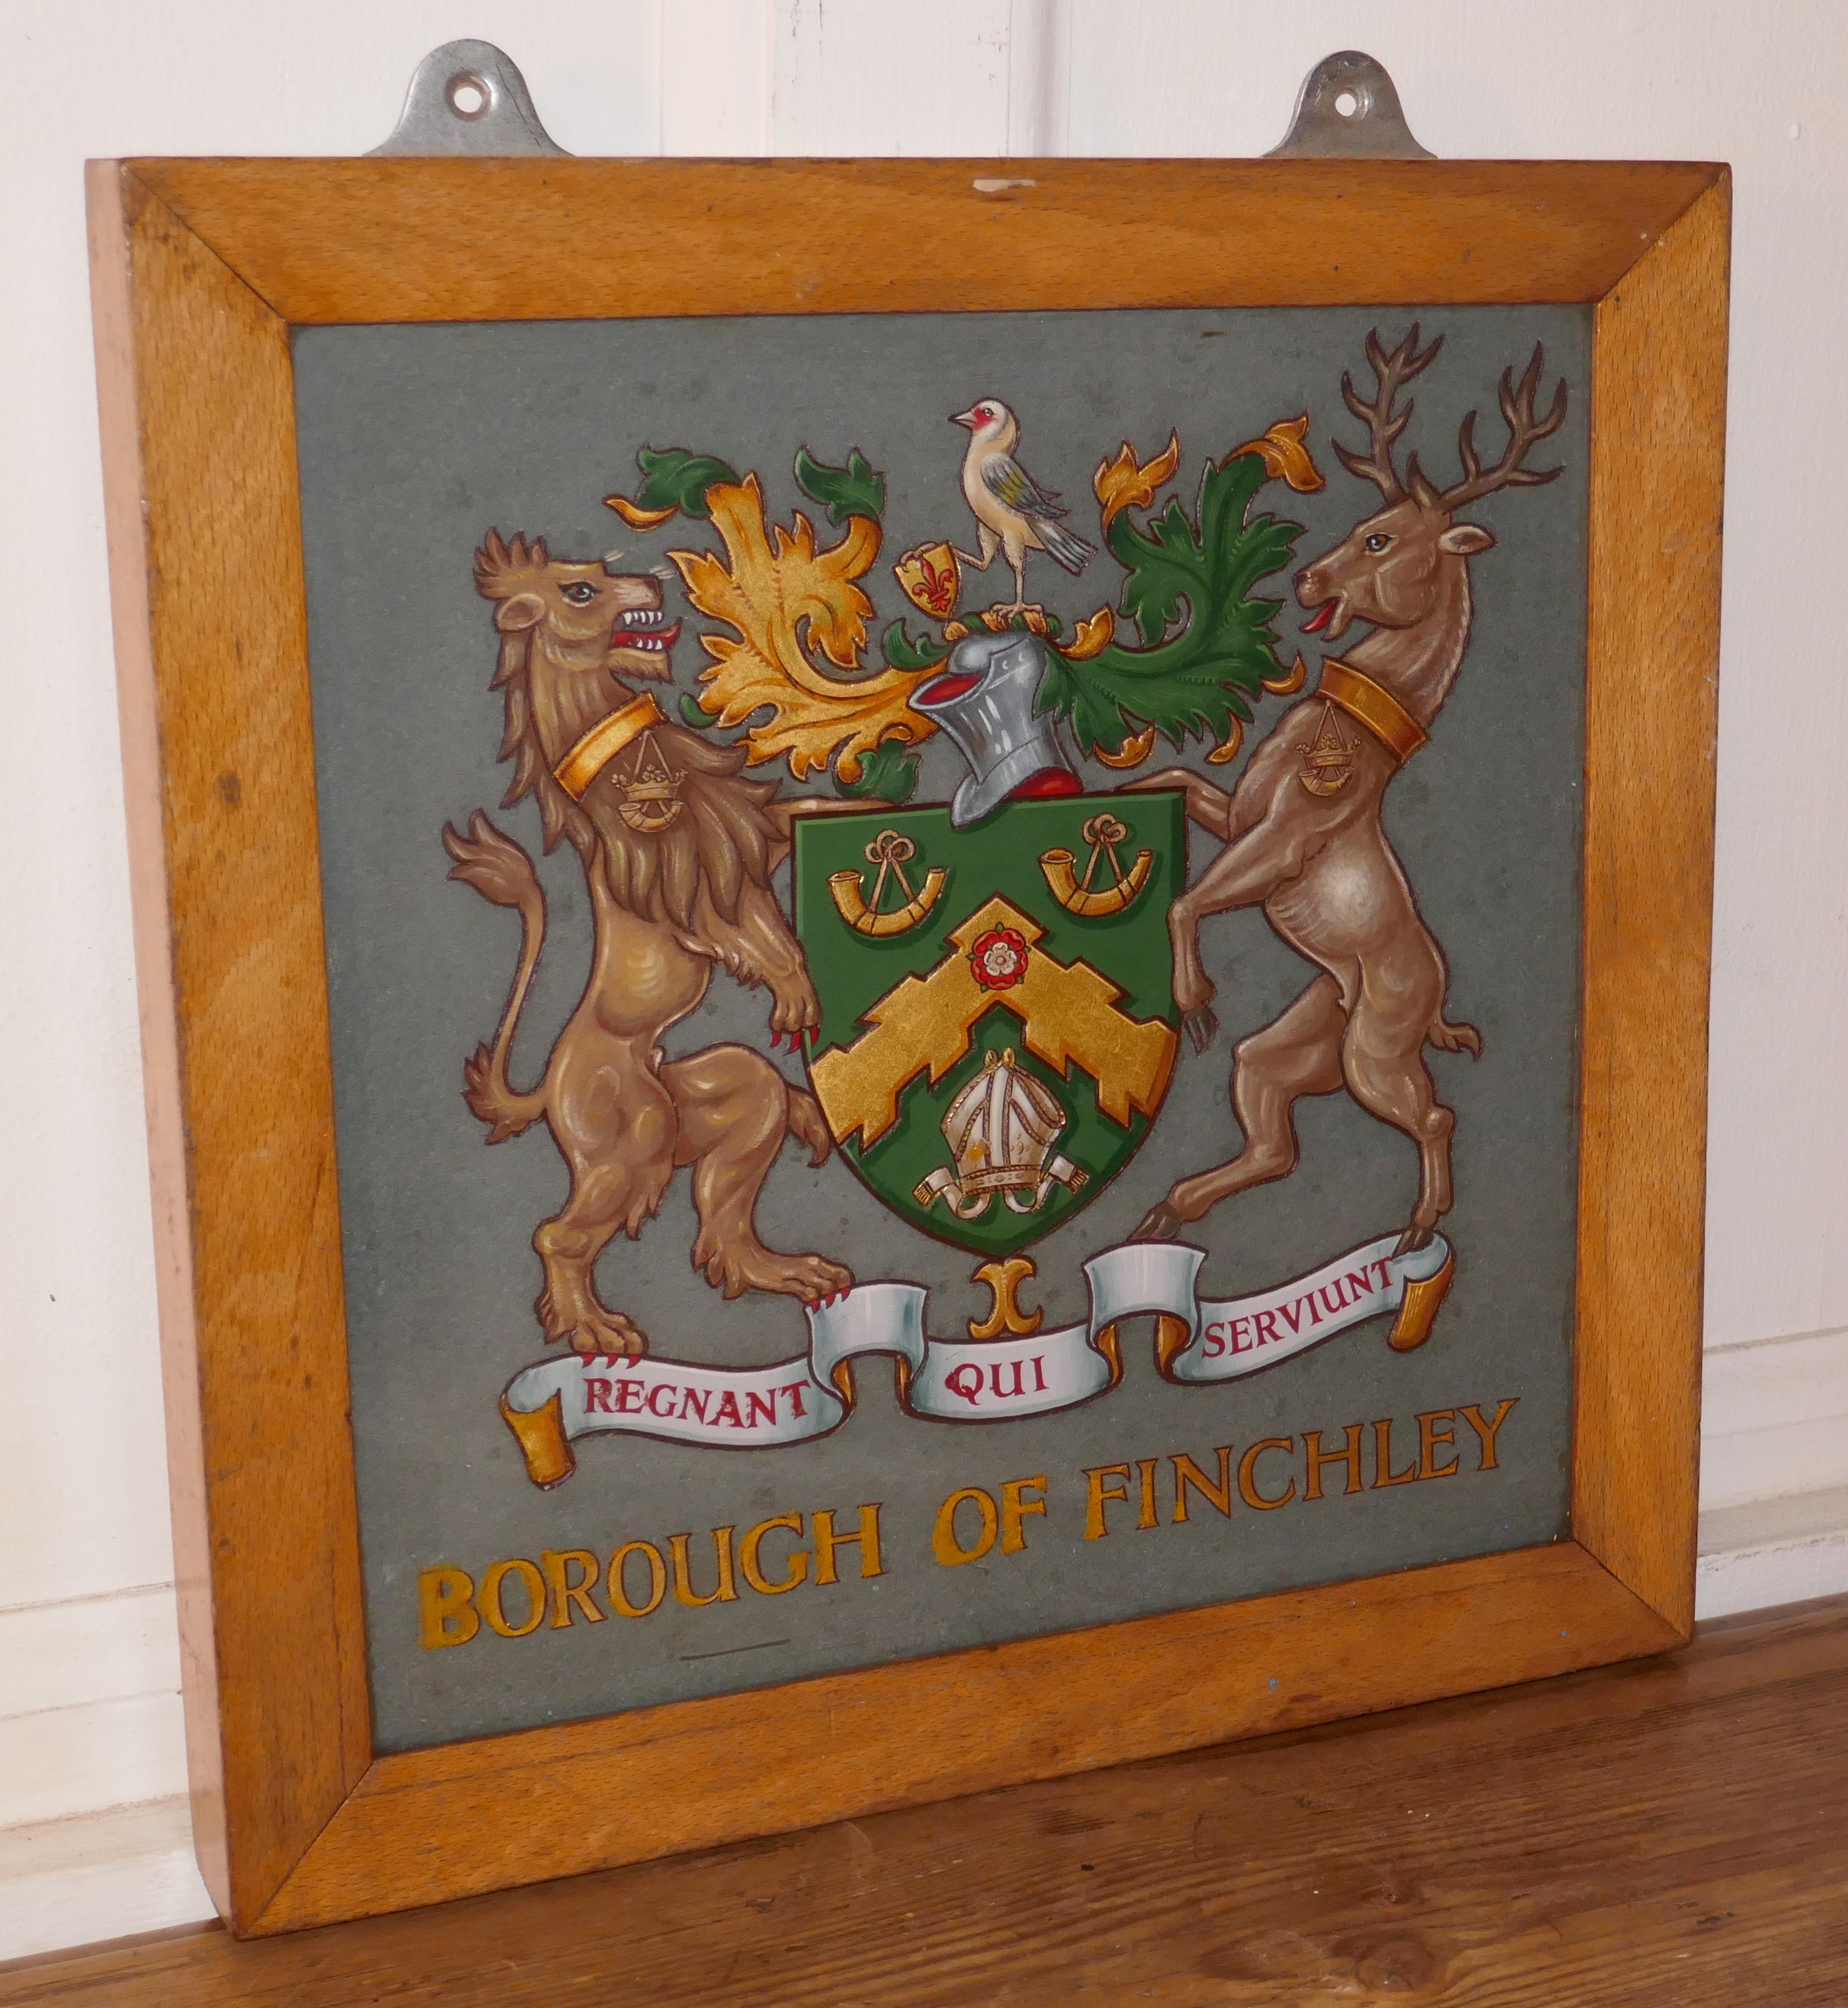 Heraldic crest framed & painted on slate from Borough of Finchley, coat of arms.



The coat of arms is 3 dimensional, it has been carved, painted and gilded, and set in golden beech frame.

The slate and painting are in good condition as they